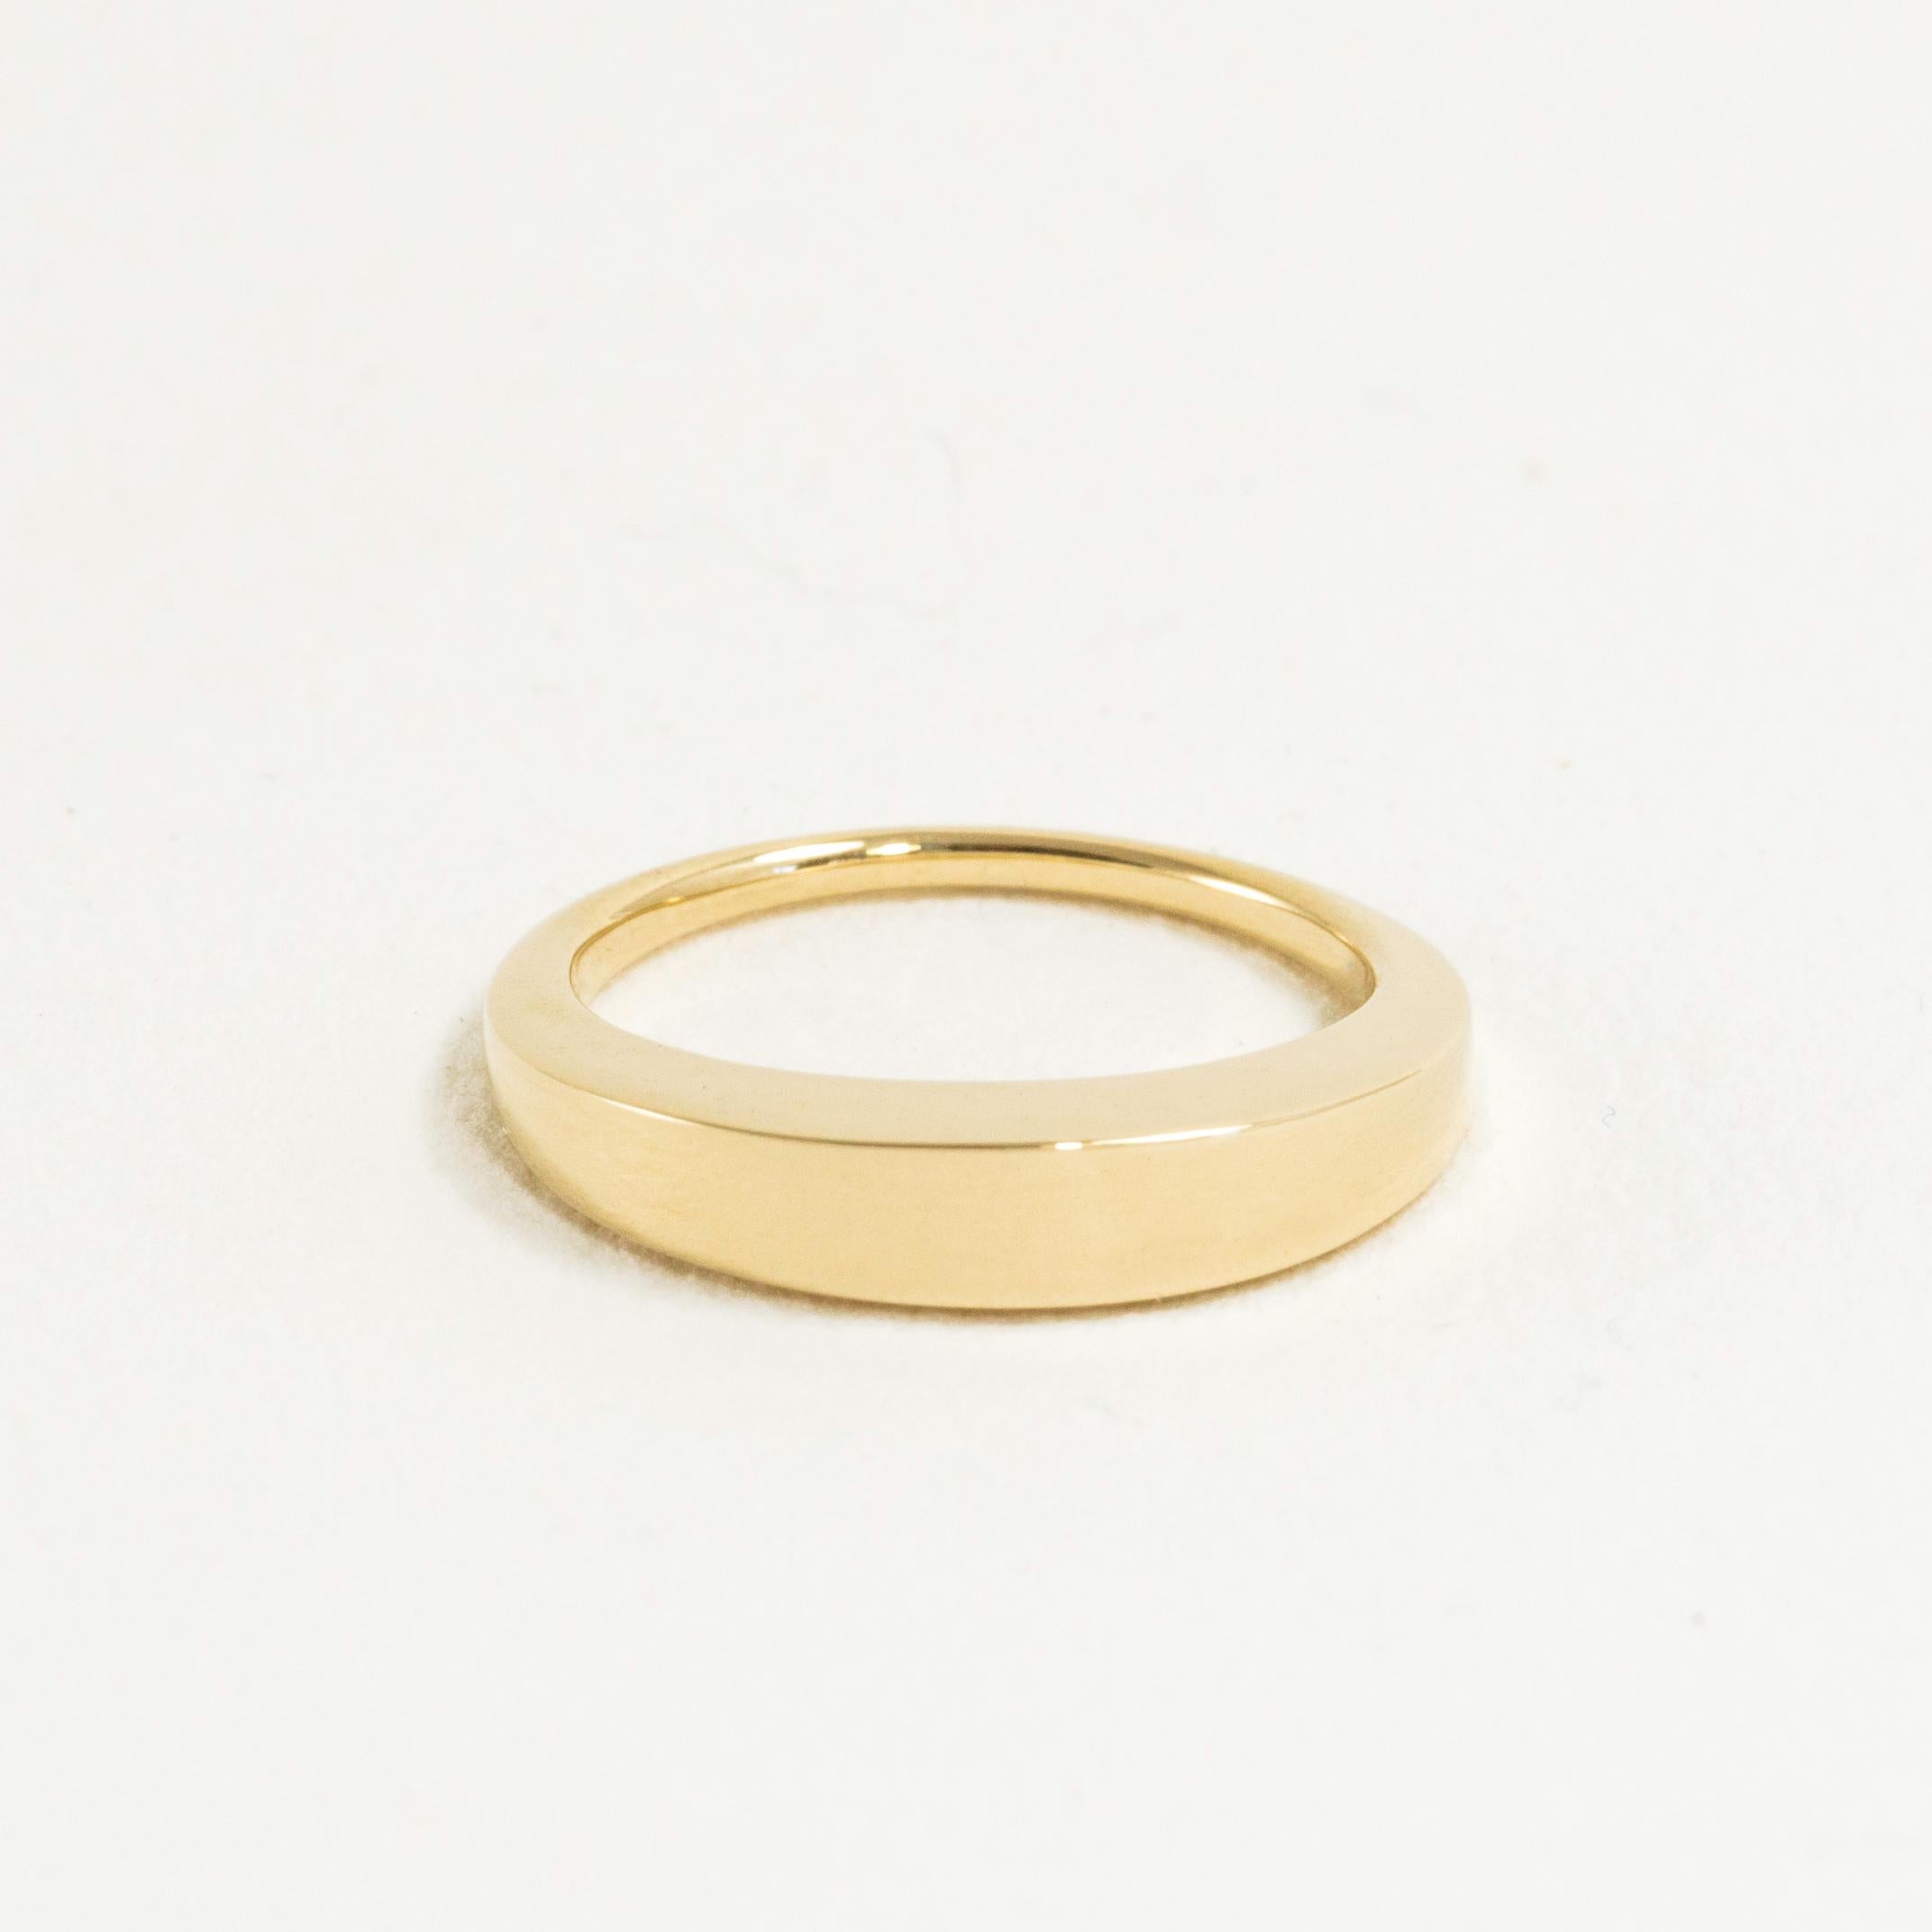 The Revolution Square ring steadily cycles from a lower circular band to a square-profile top and back again. As the classic rounded base shapeshifts into a bold and balanced gesture , this piece reminds us to enjoy life’s transitional interludes